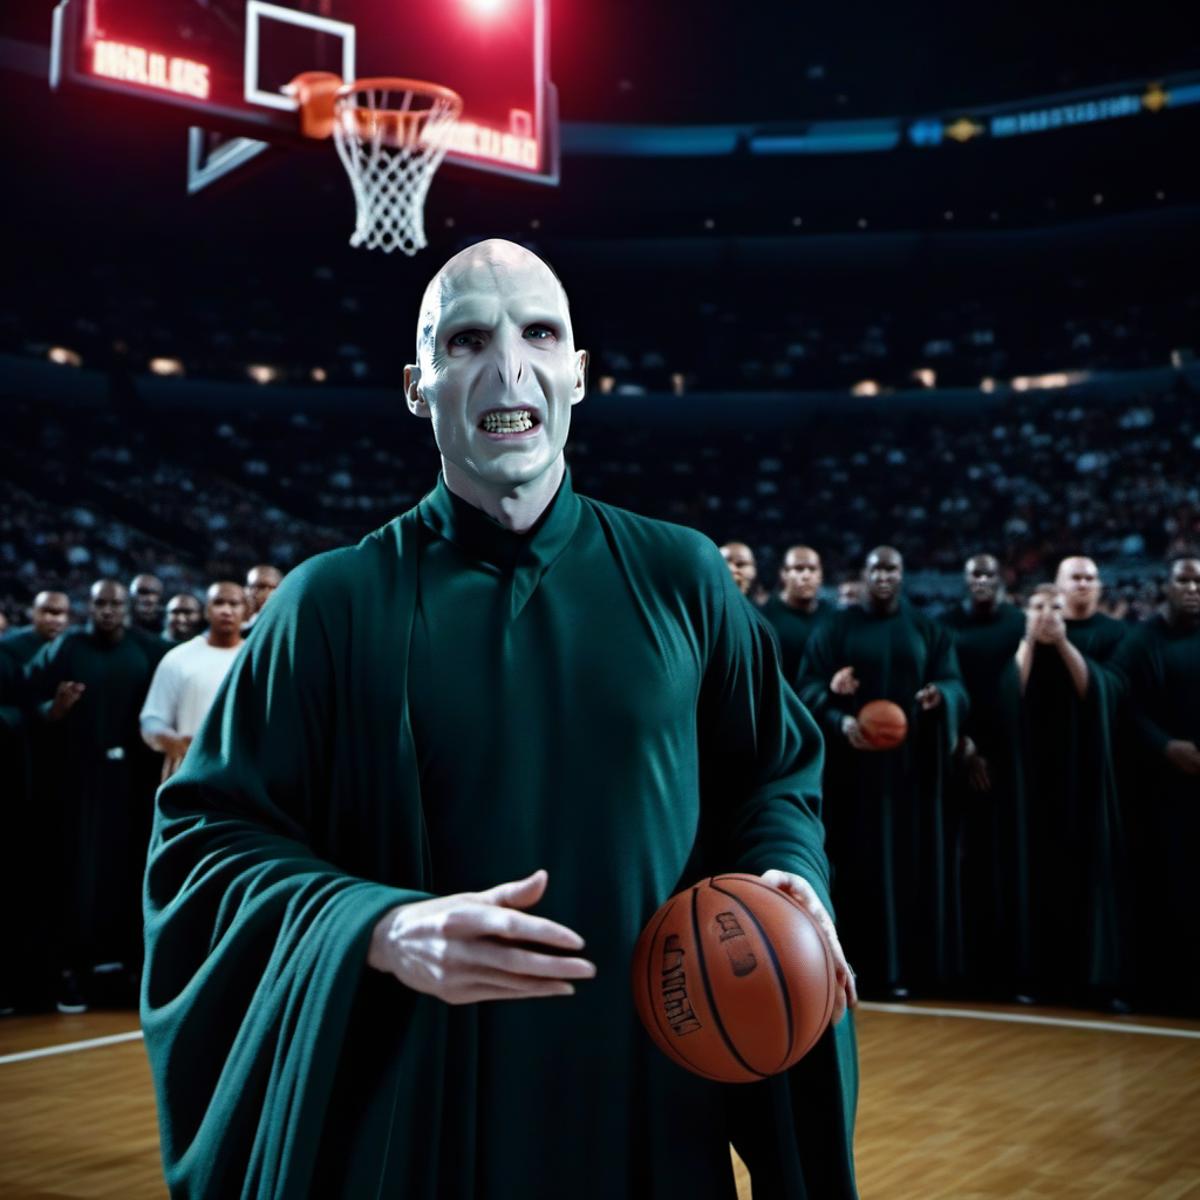 Lord Voldemort - Harry Potter - SDXL image by PhotobAIt